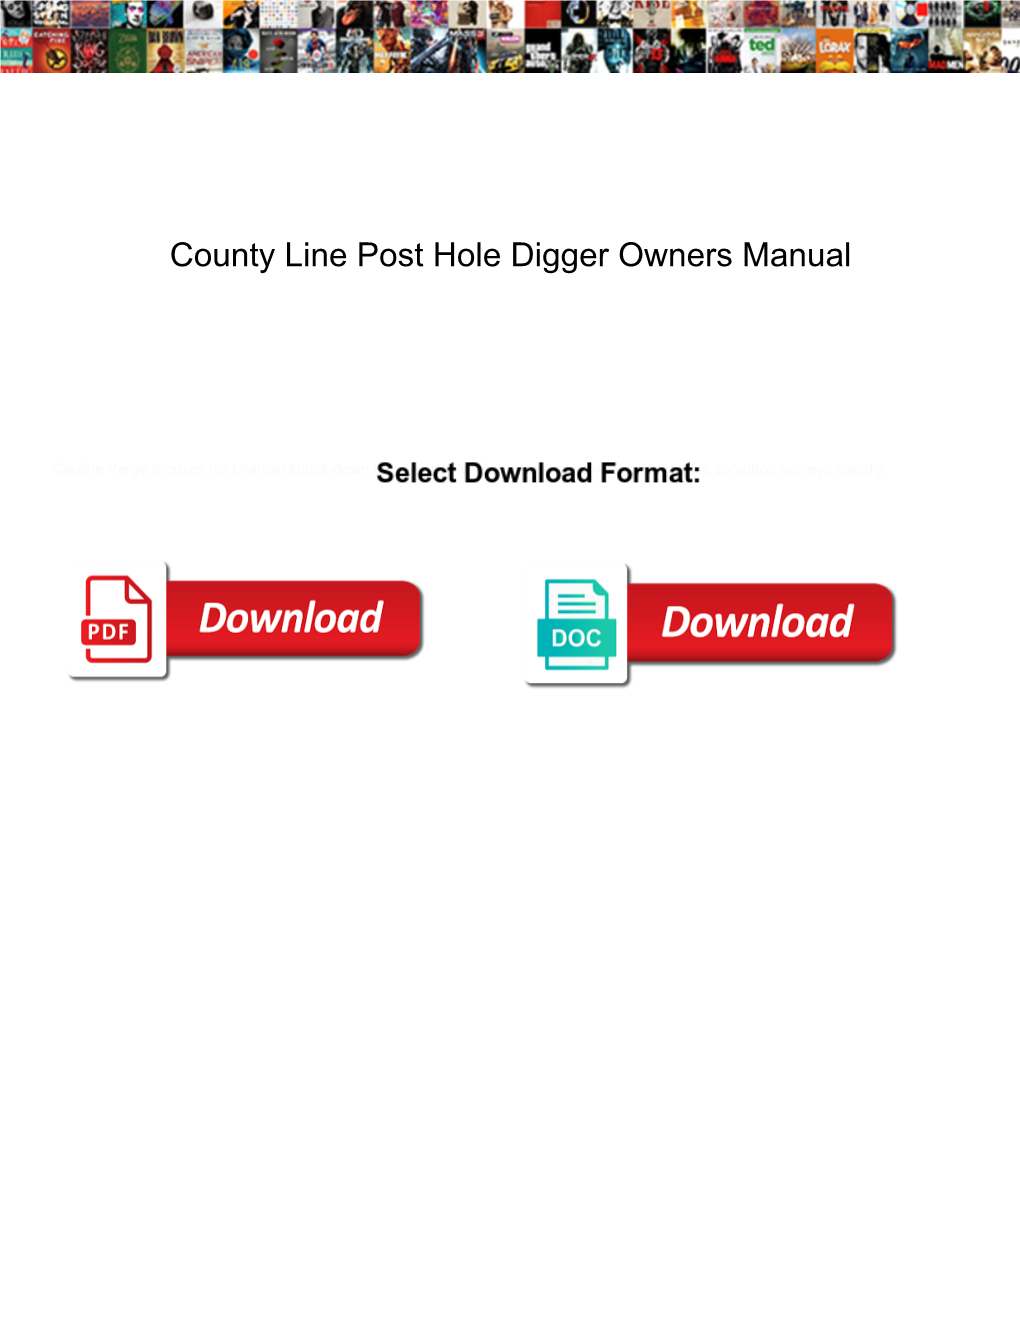 County Line Post Hole Digger Owners Manual